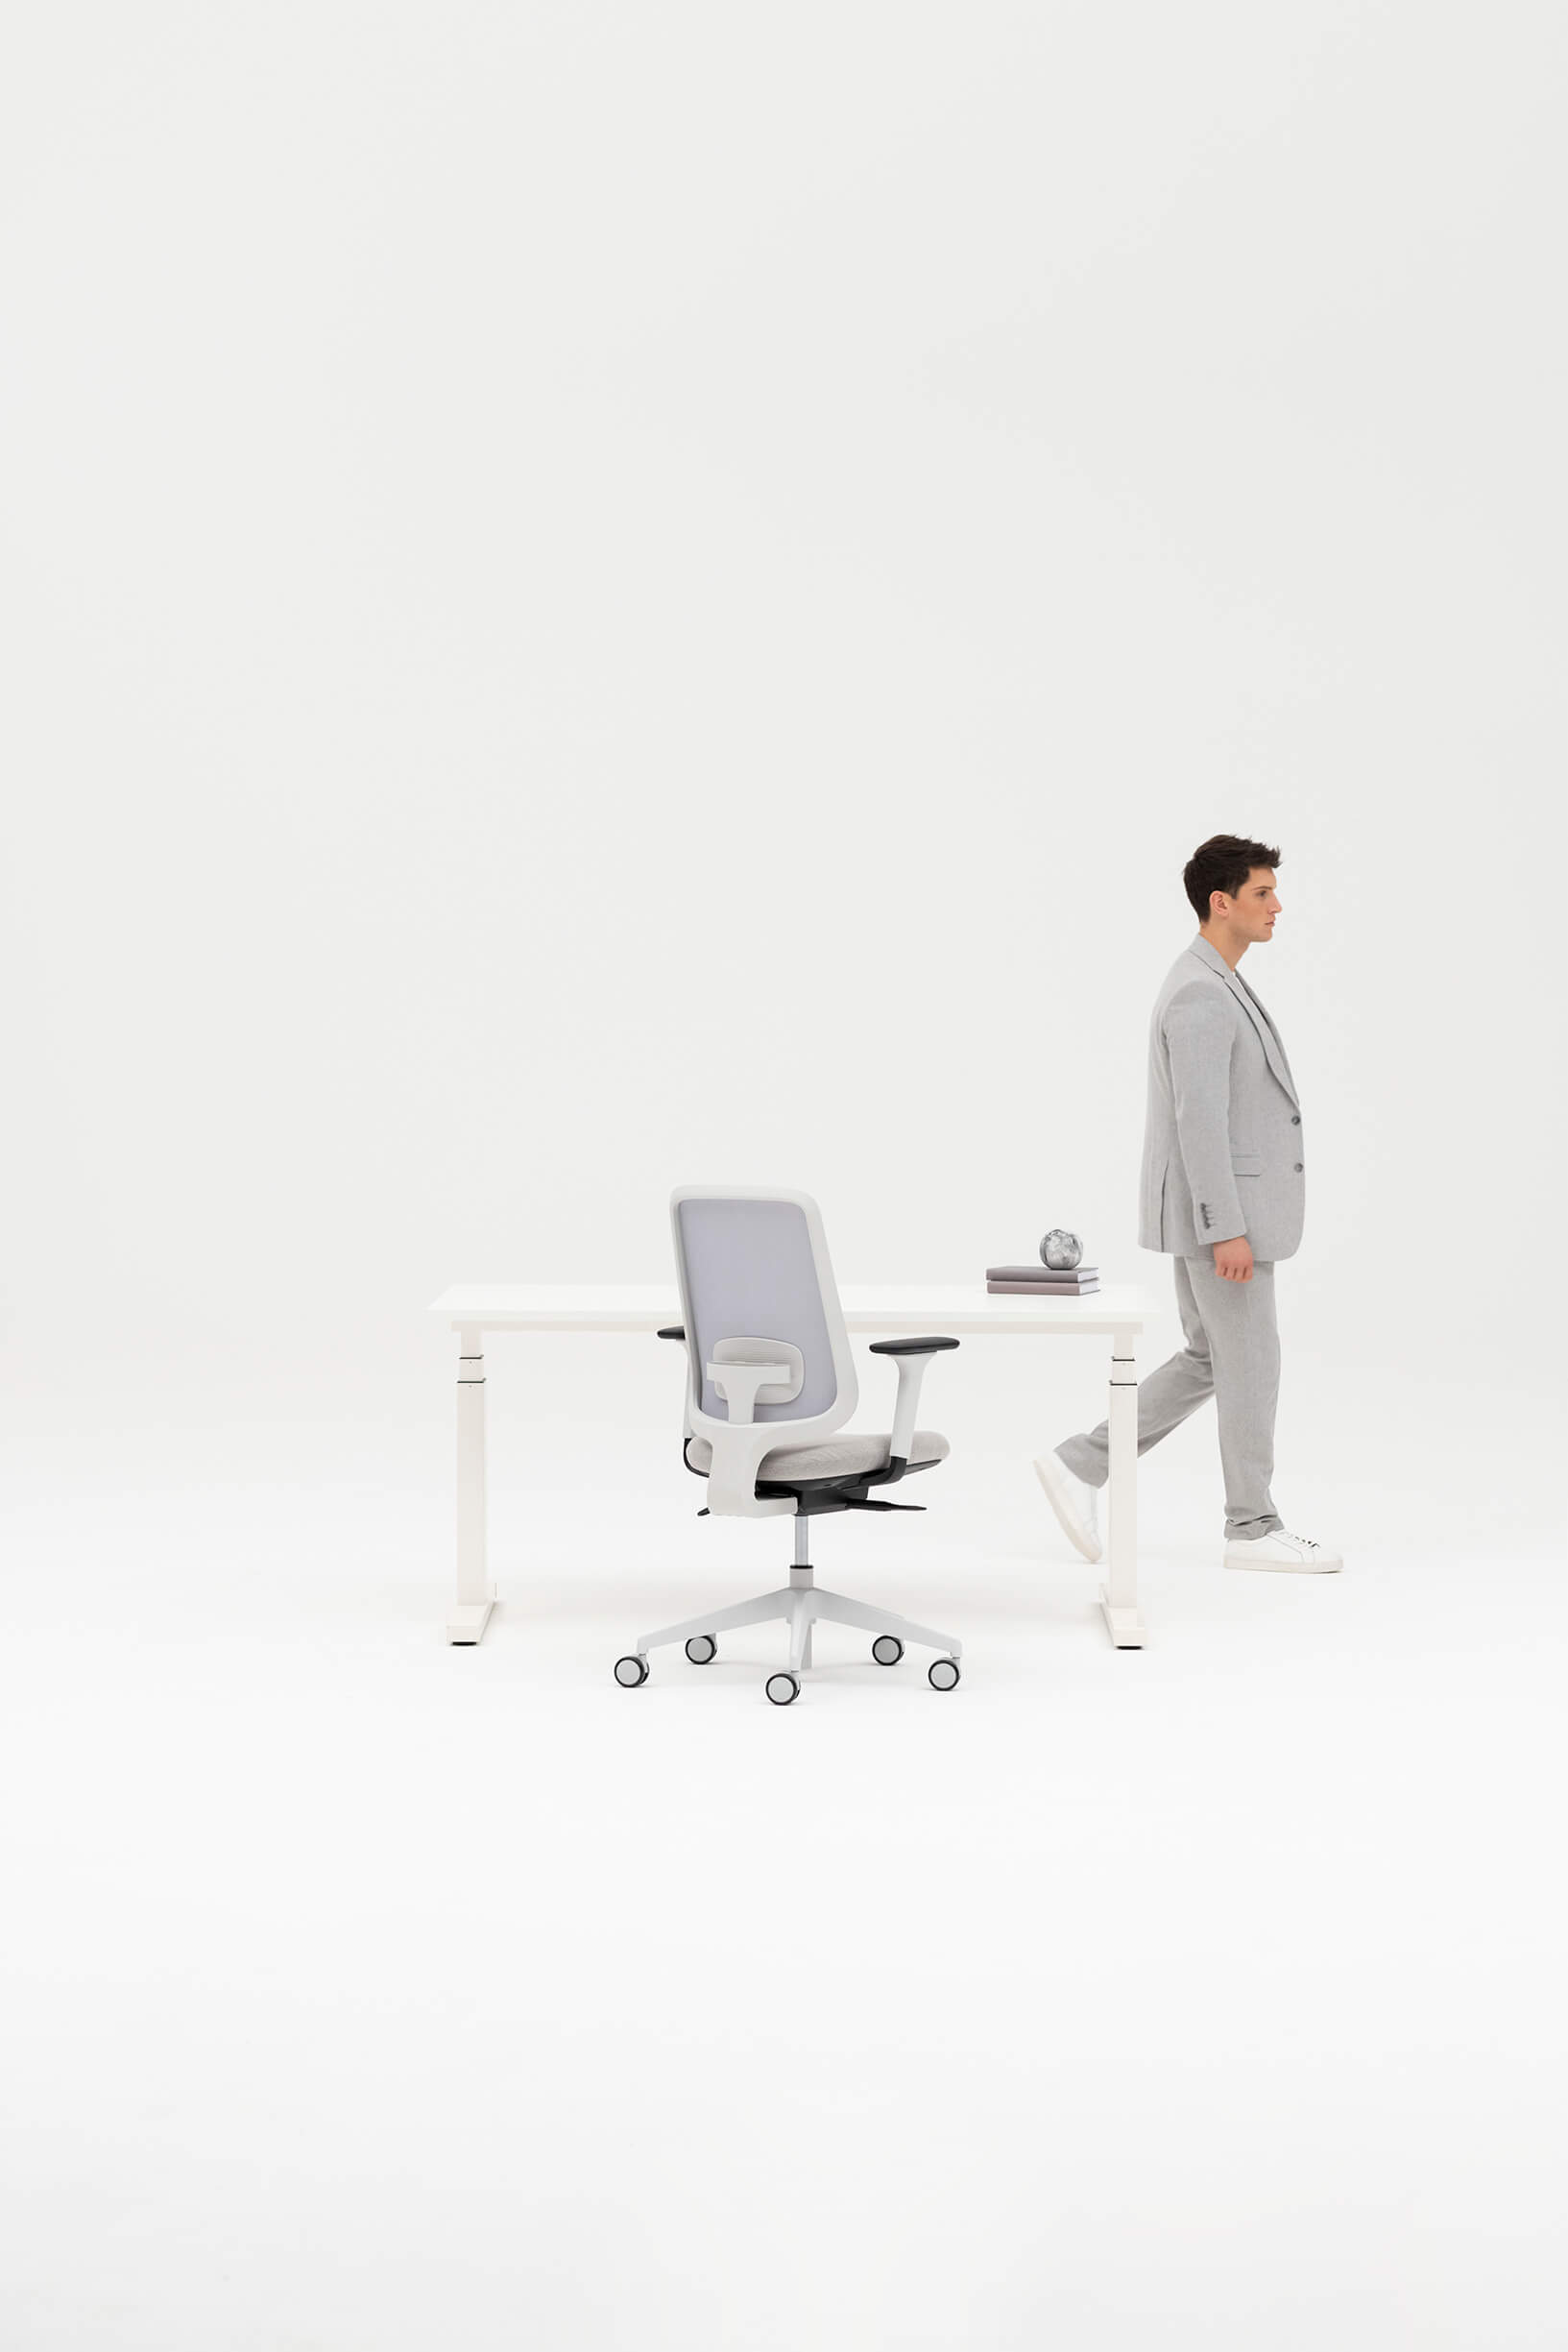 Model In Grey Trousers and Blazer Walking In Front Of A White Desk One Adjustable Height Desk And Task One Chair